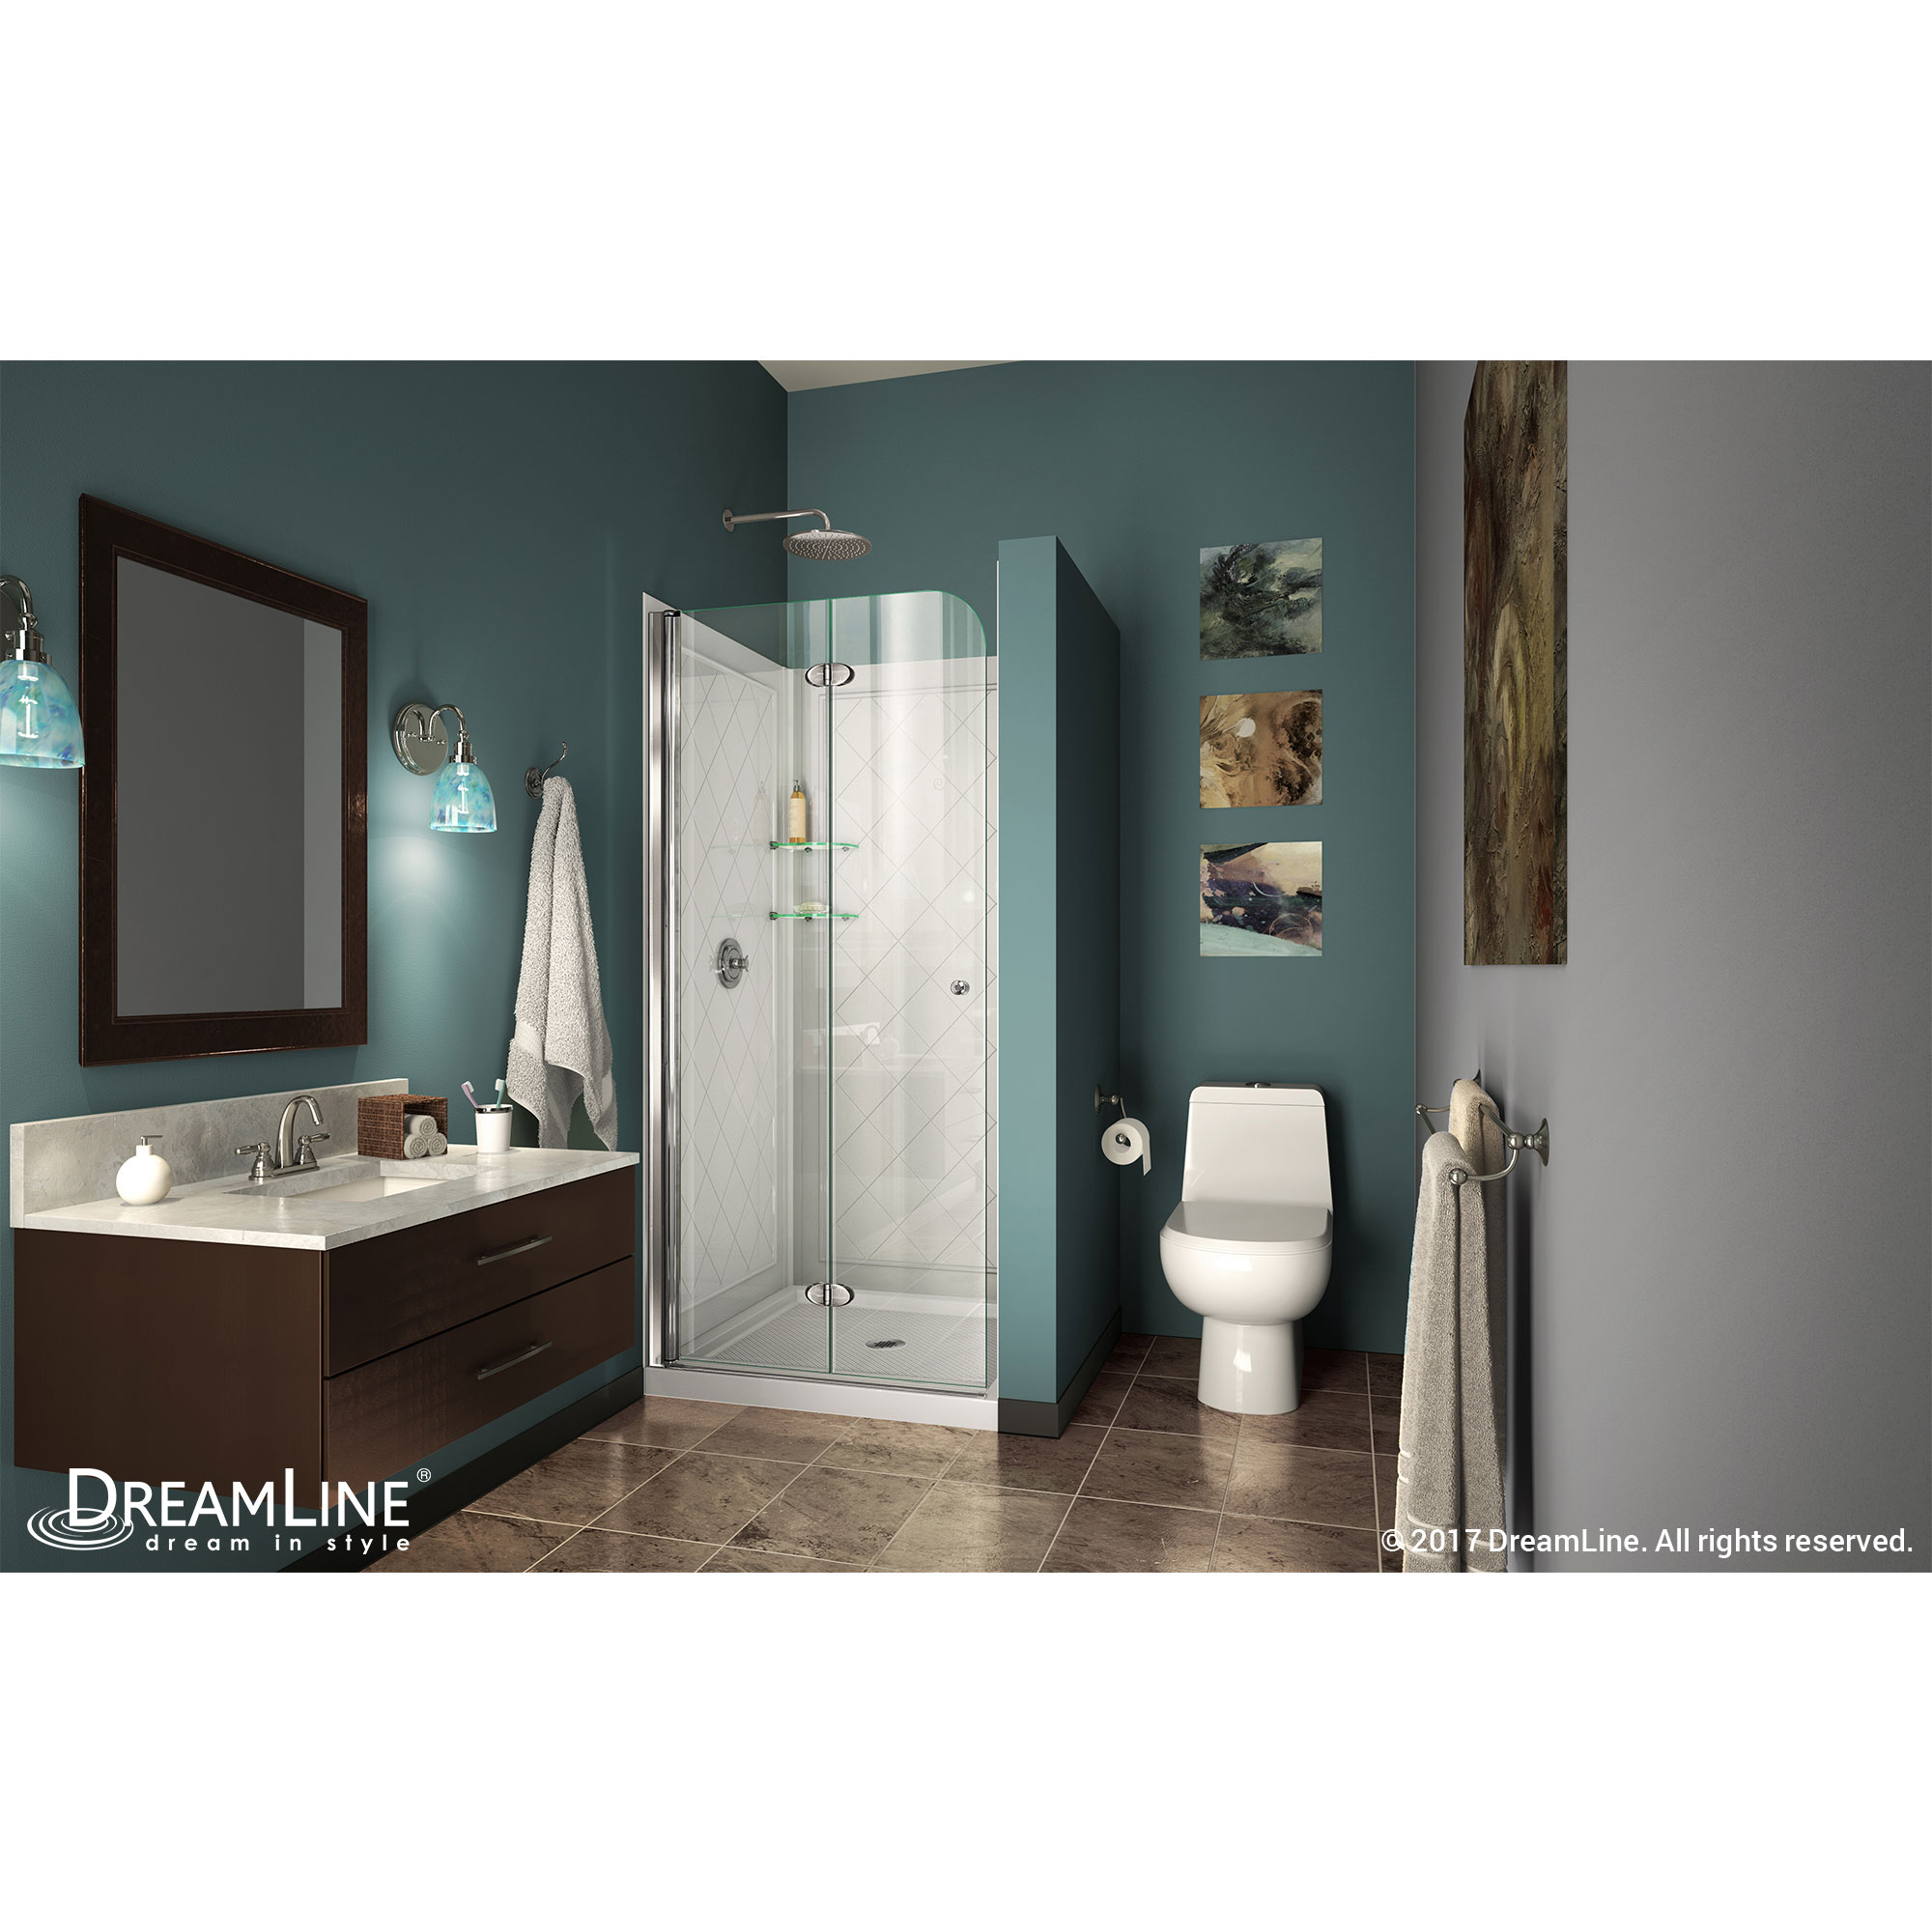 DreamLine Aqua Fold 32 in. D x 32 in. W x 74 3/4 in. H Bi-Fold Shower Door in Chrome with White Acrylic Base and Backwall Kit